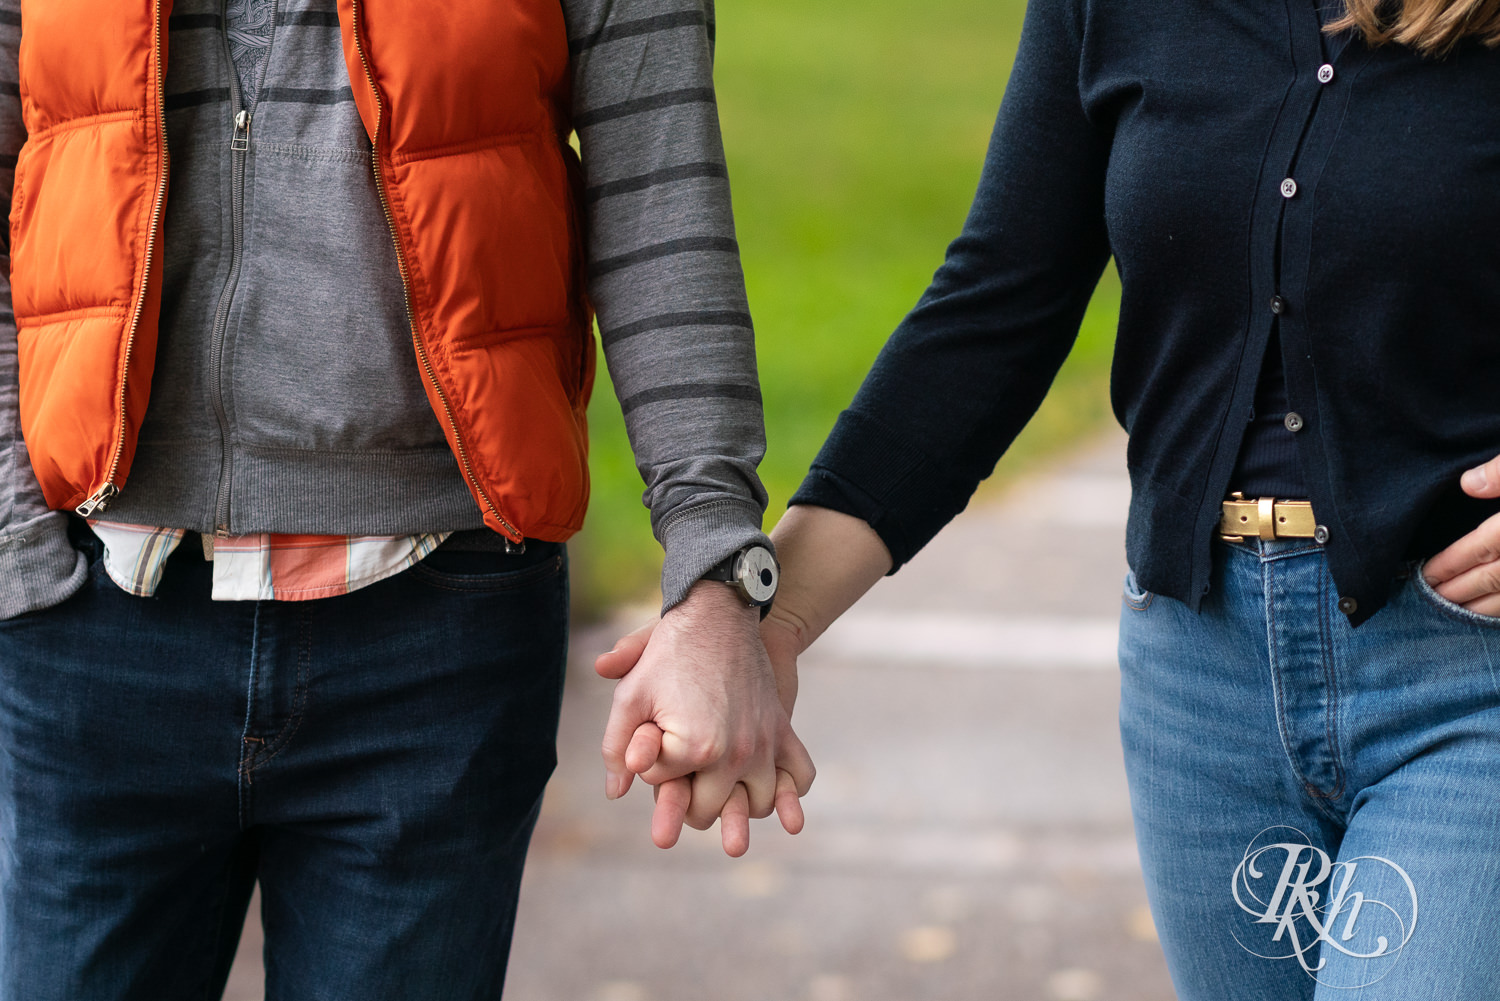 Man and woman in hoodies and jeans hold hands during rainy engagement photos at Boom Island Park in Minneapolis, Minnesota.